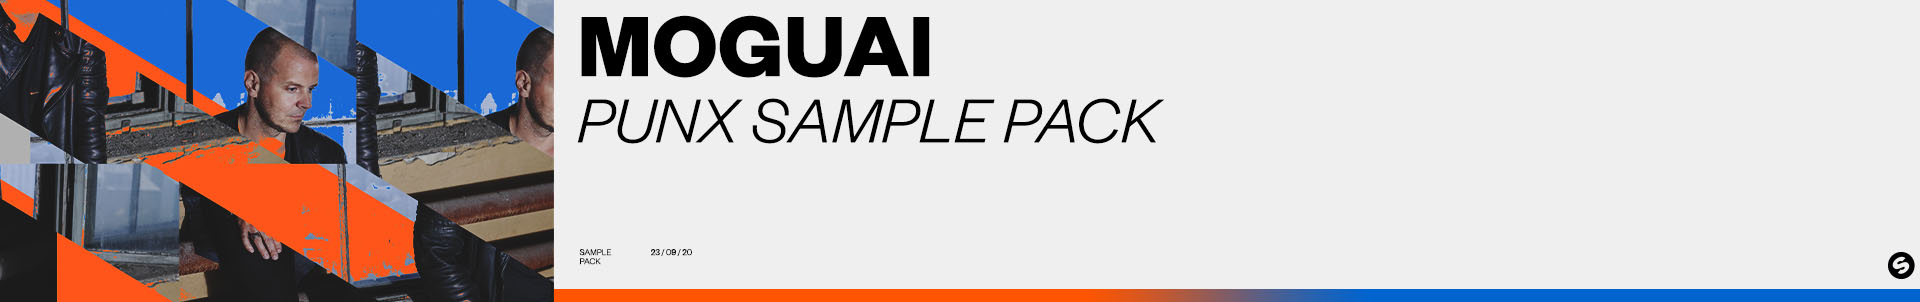 MOGUAI's PUNX Sample Pack is here to up your producing game!